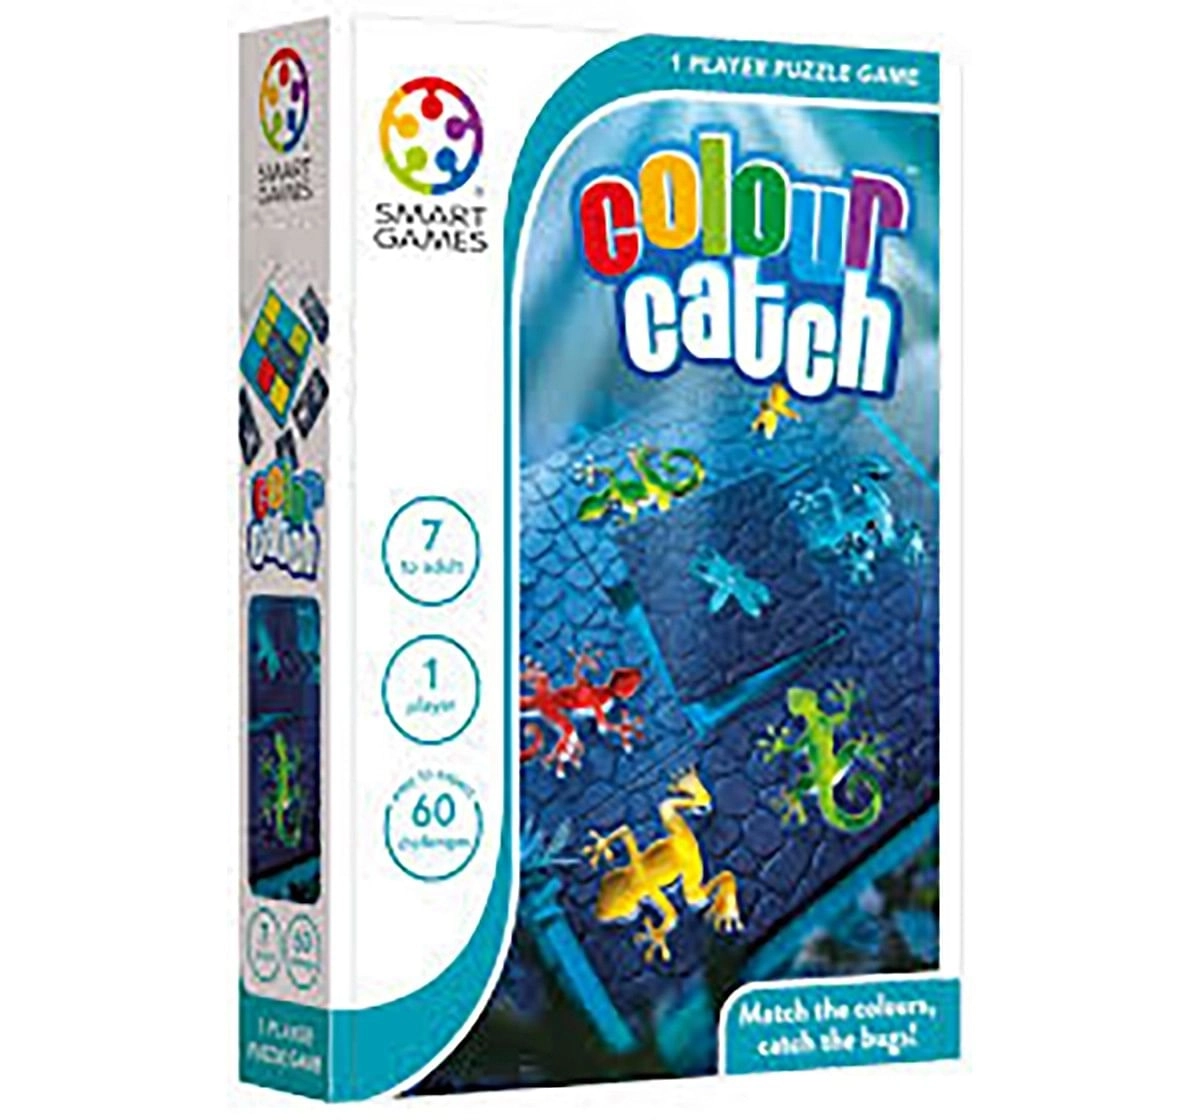 Smart Games Colour Catch for Kids age 7Y+ 